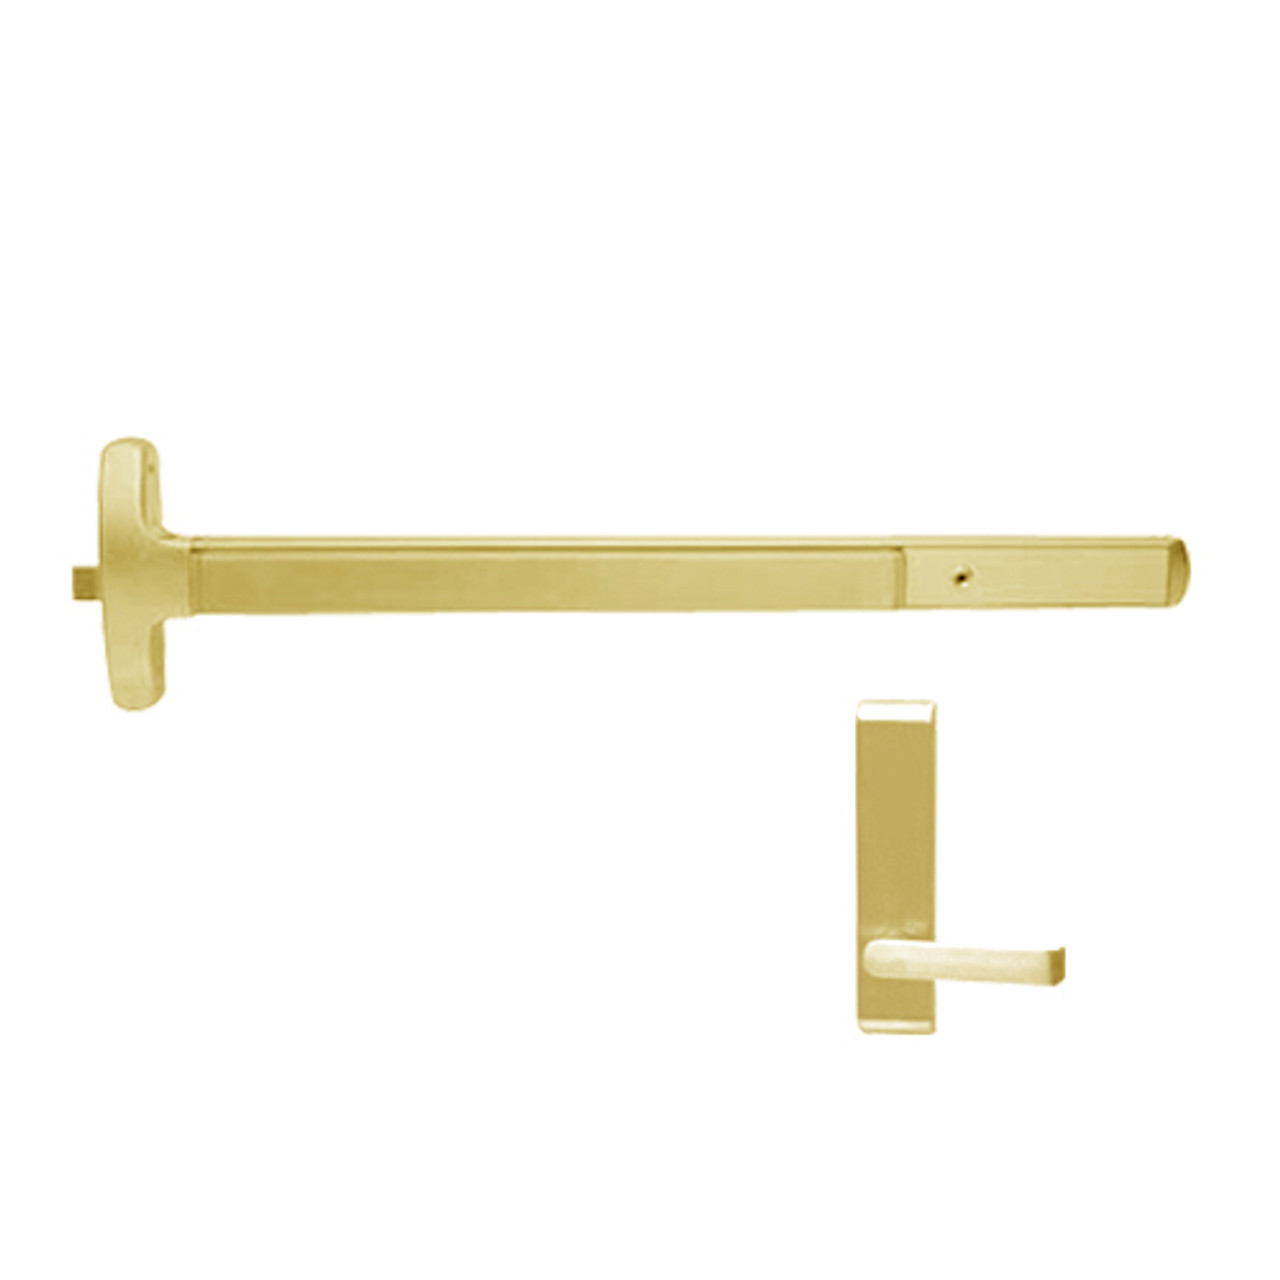 24-R-L-DT-DANE-US3-3-LHR Falcon Exit Device in Polished Brass